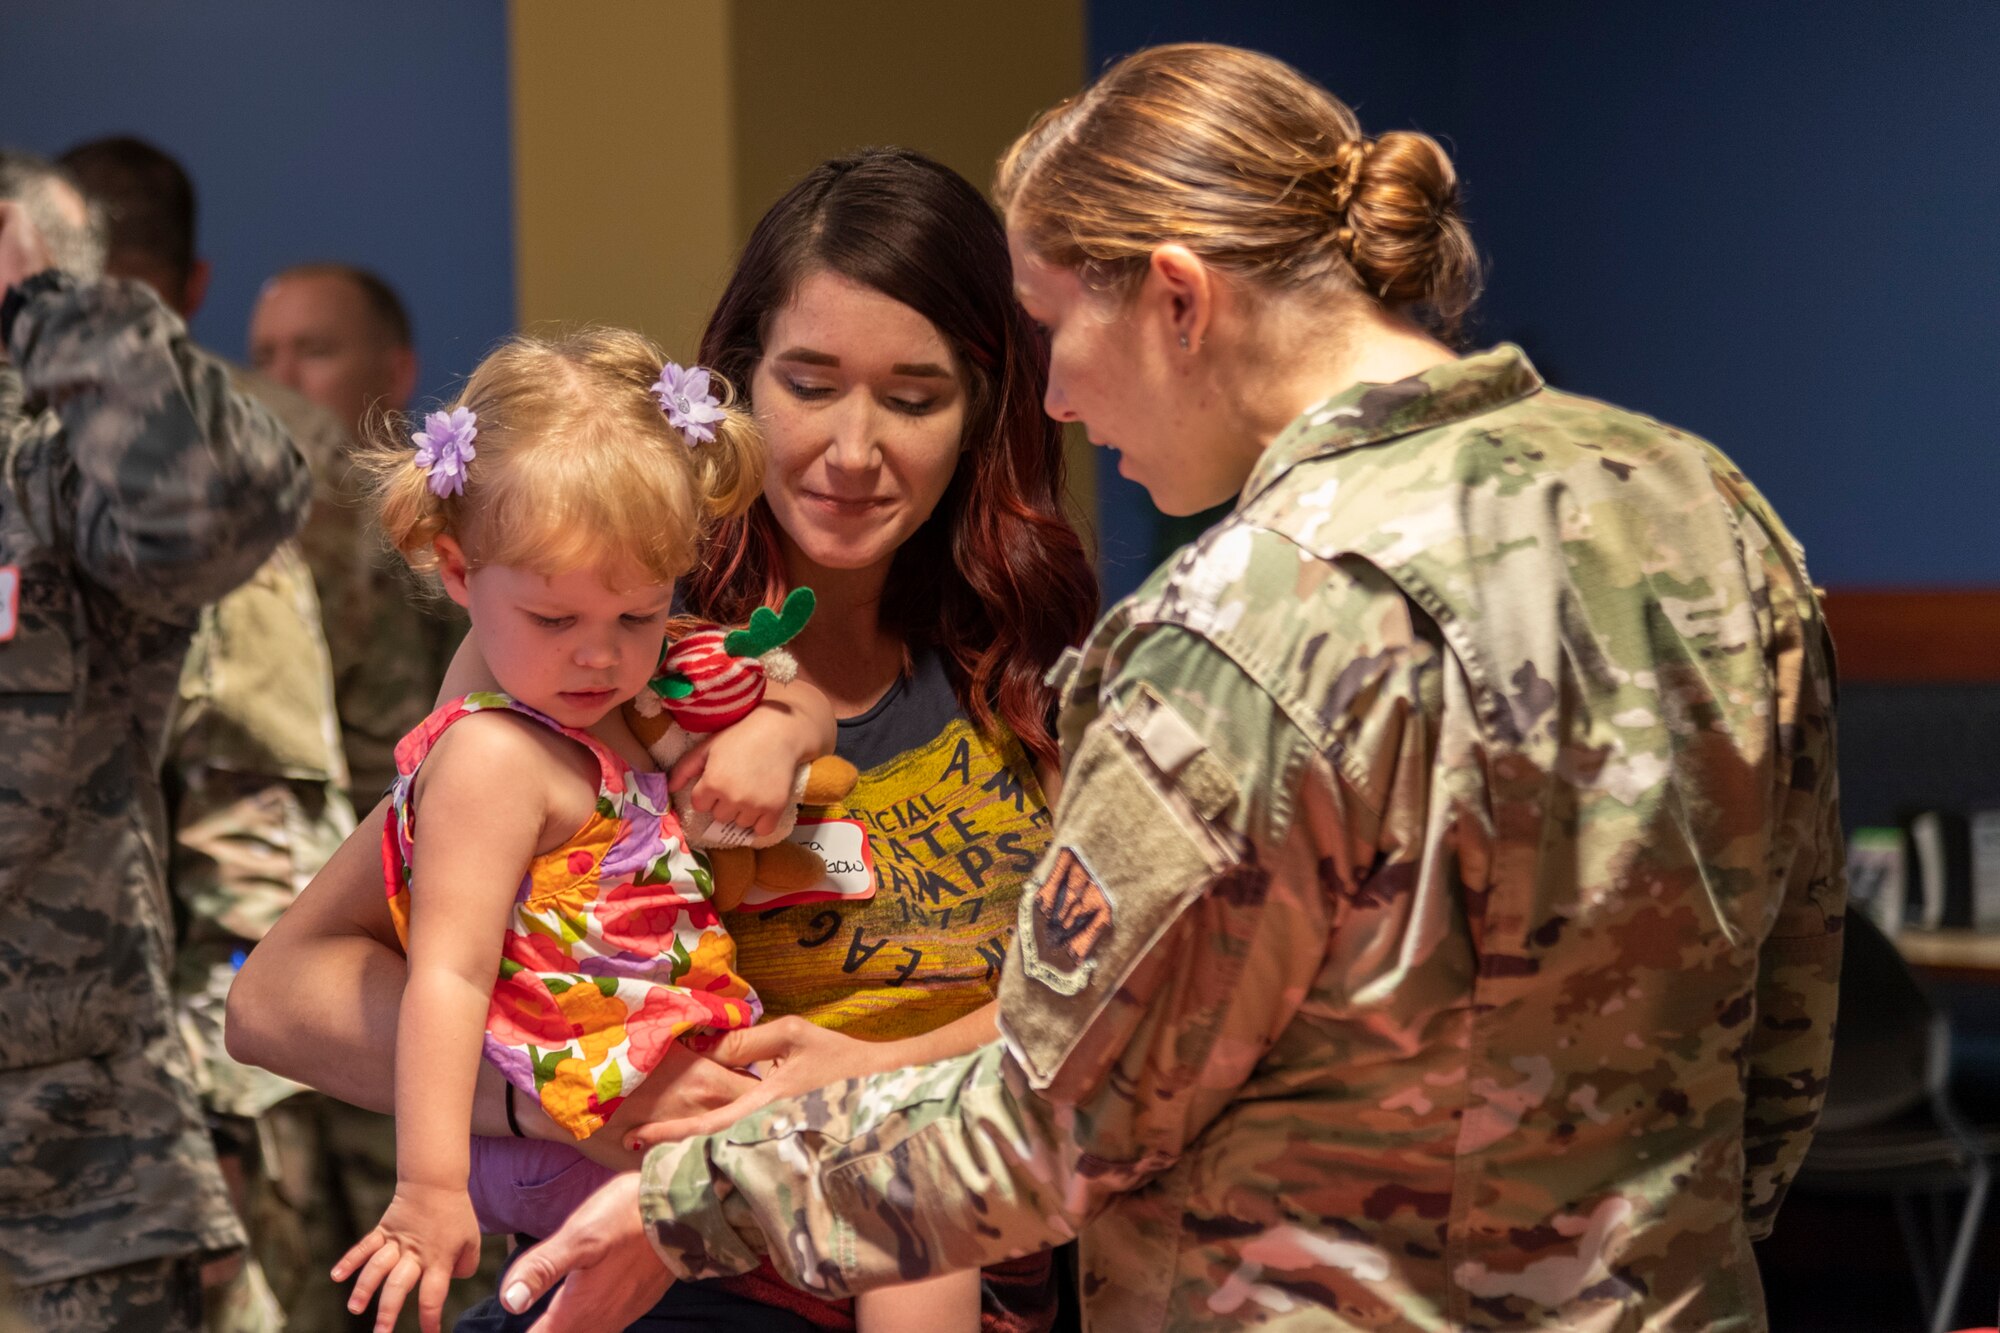 Participants socialize during a deployed spouse dinner, June 18, 2019, at Moody Air Force Base, Ga. The dinner served as an opportunity for the families of deployed members to bond and provide relief. The mission's success depends on resilient Airmen and families, who are prepared to make sacrifices with the support of their fellow Airmen, local communities and leadership. (U.S. Air Force photo by Airman 1st Class Hayden Legg)